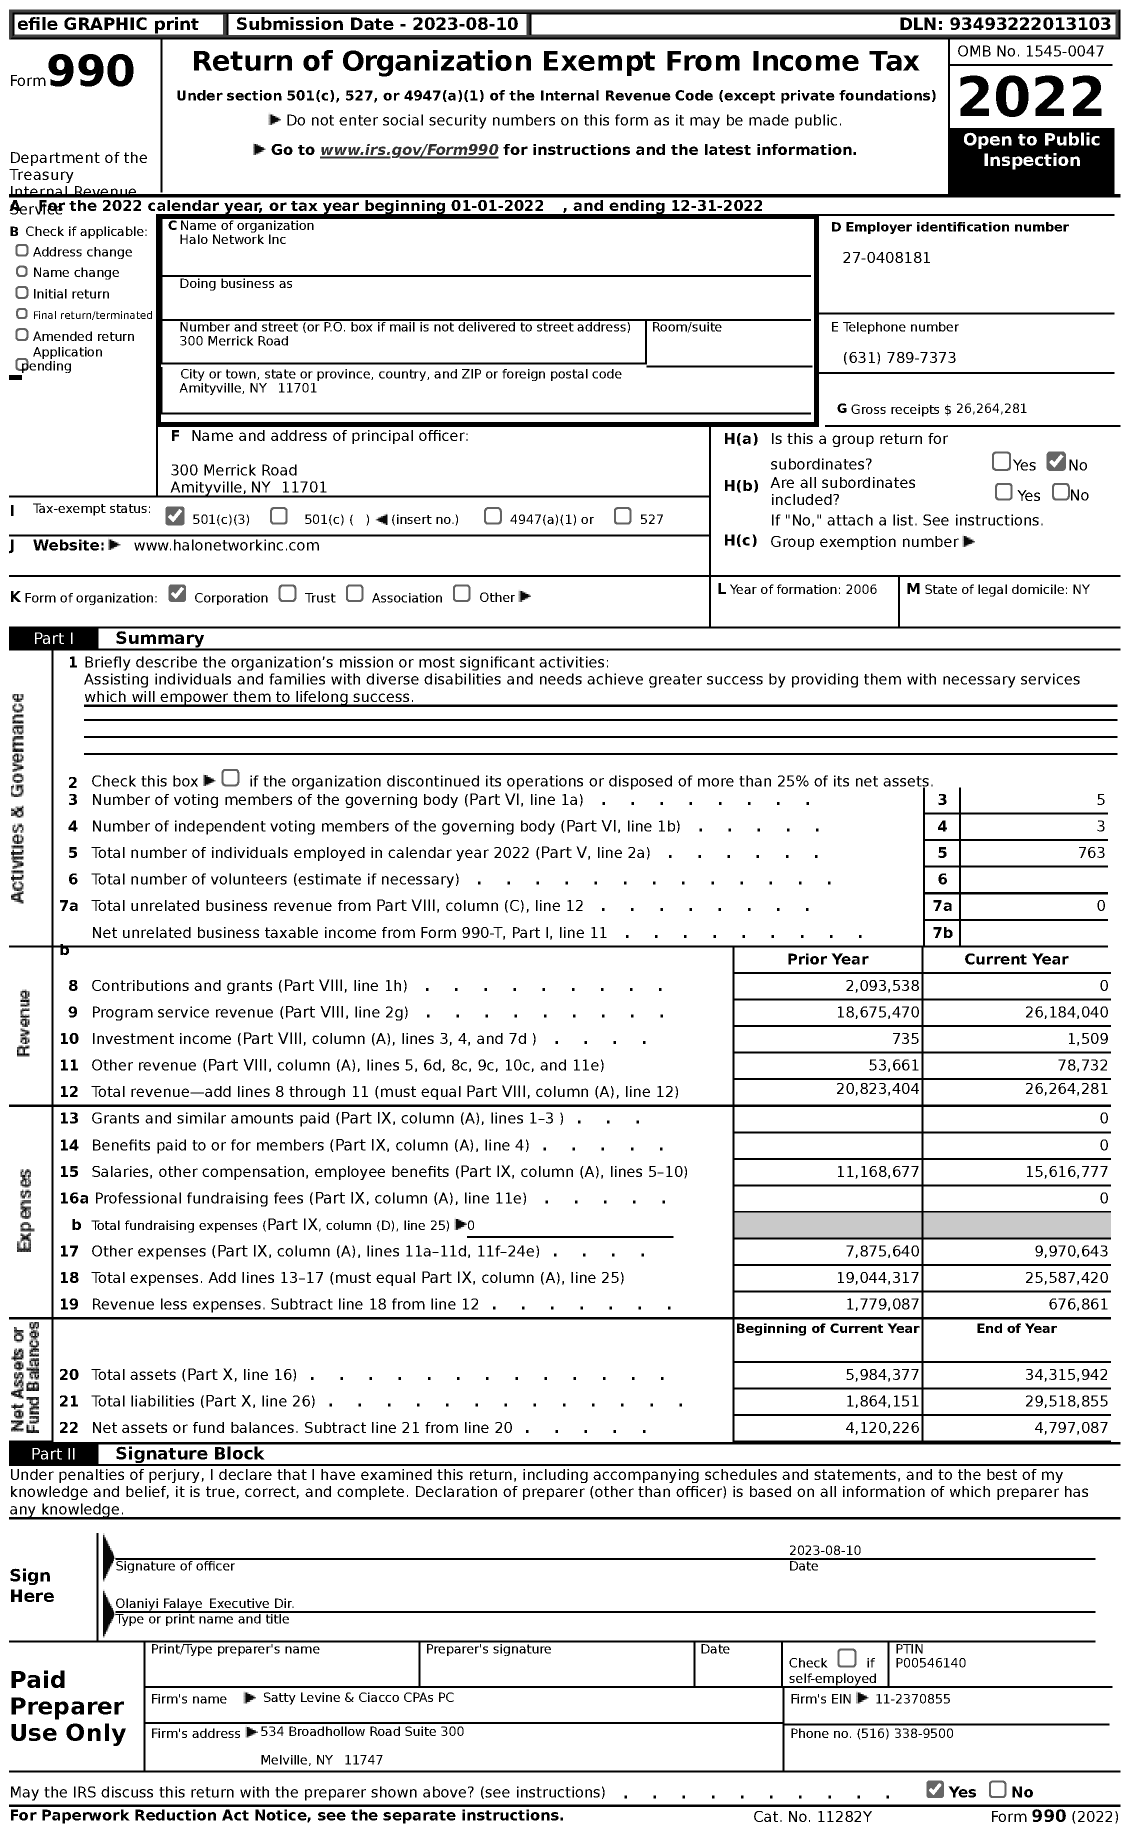 Image of first page of 2022 Form 990 for Halo Network